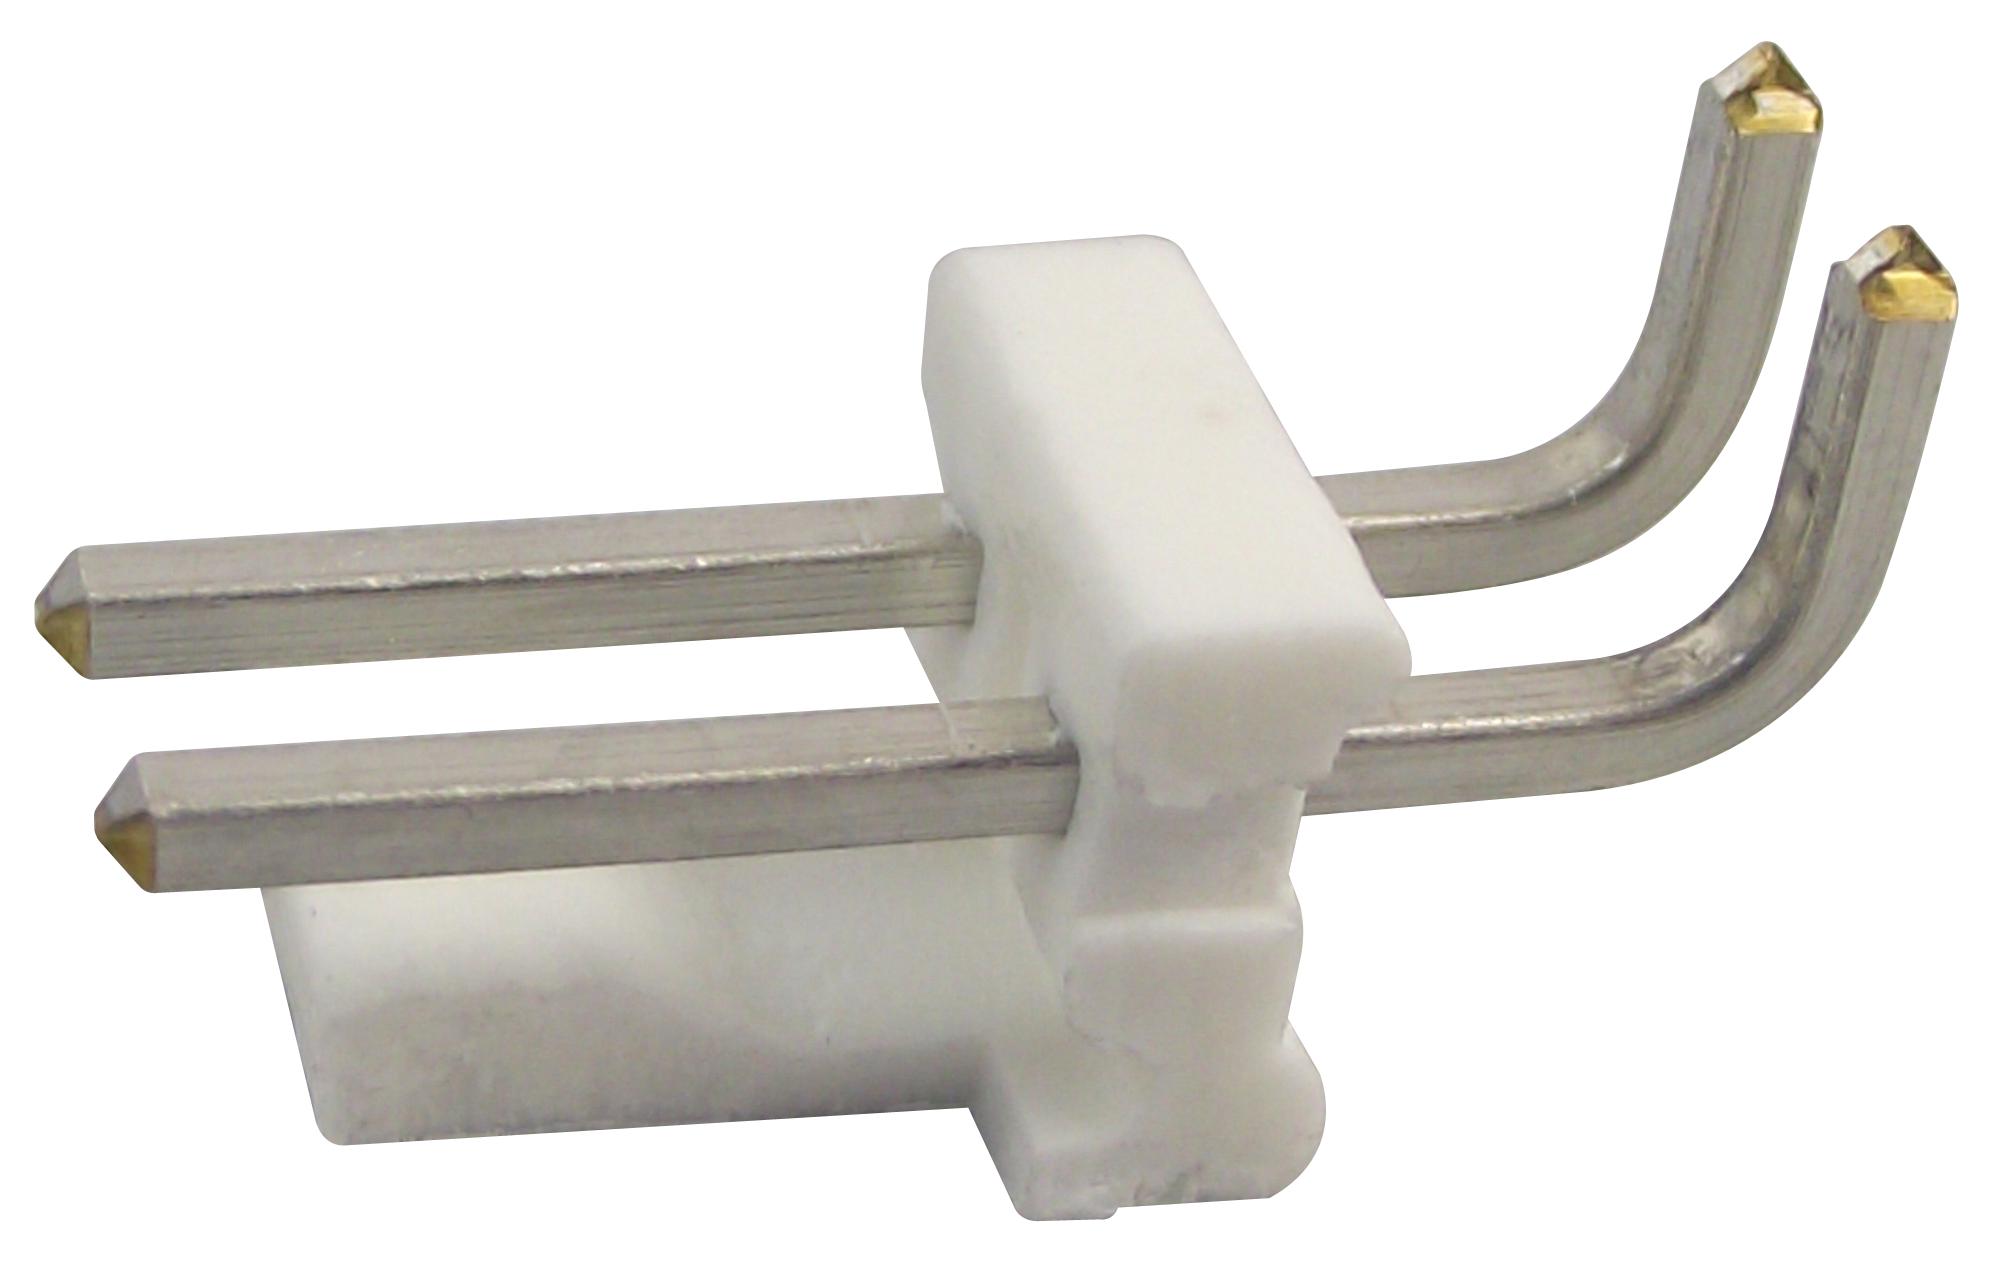 640389-2 HEADER, RIGHT ANGLE, 0.156", 2WAY AMP - TE CONNECTIVITY